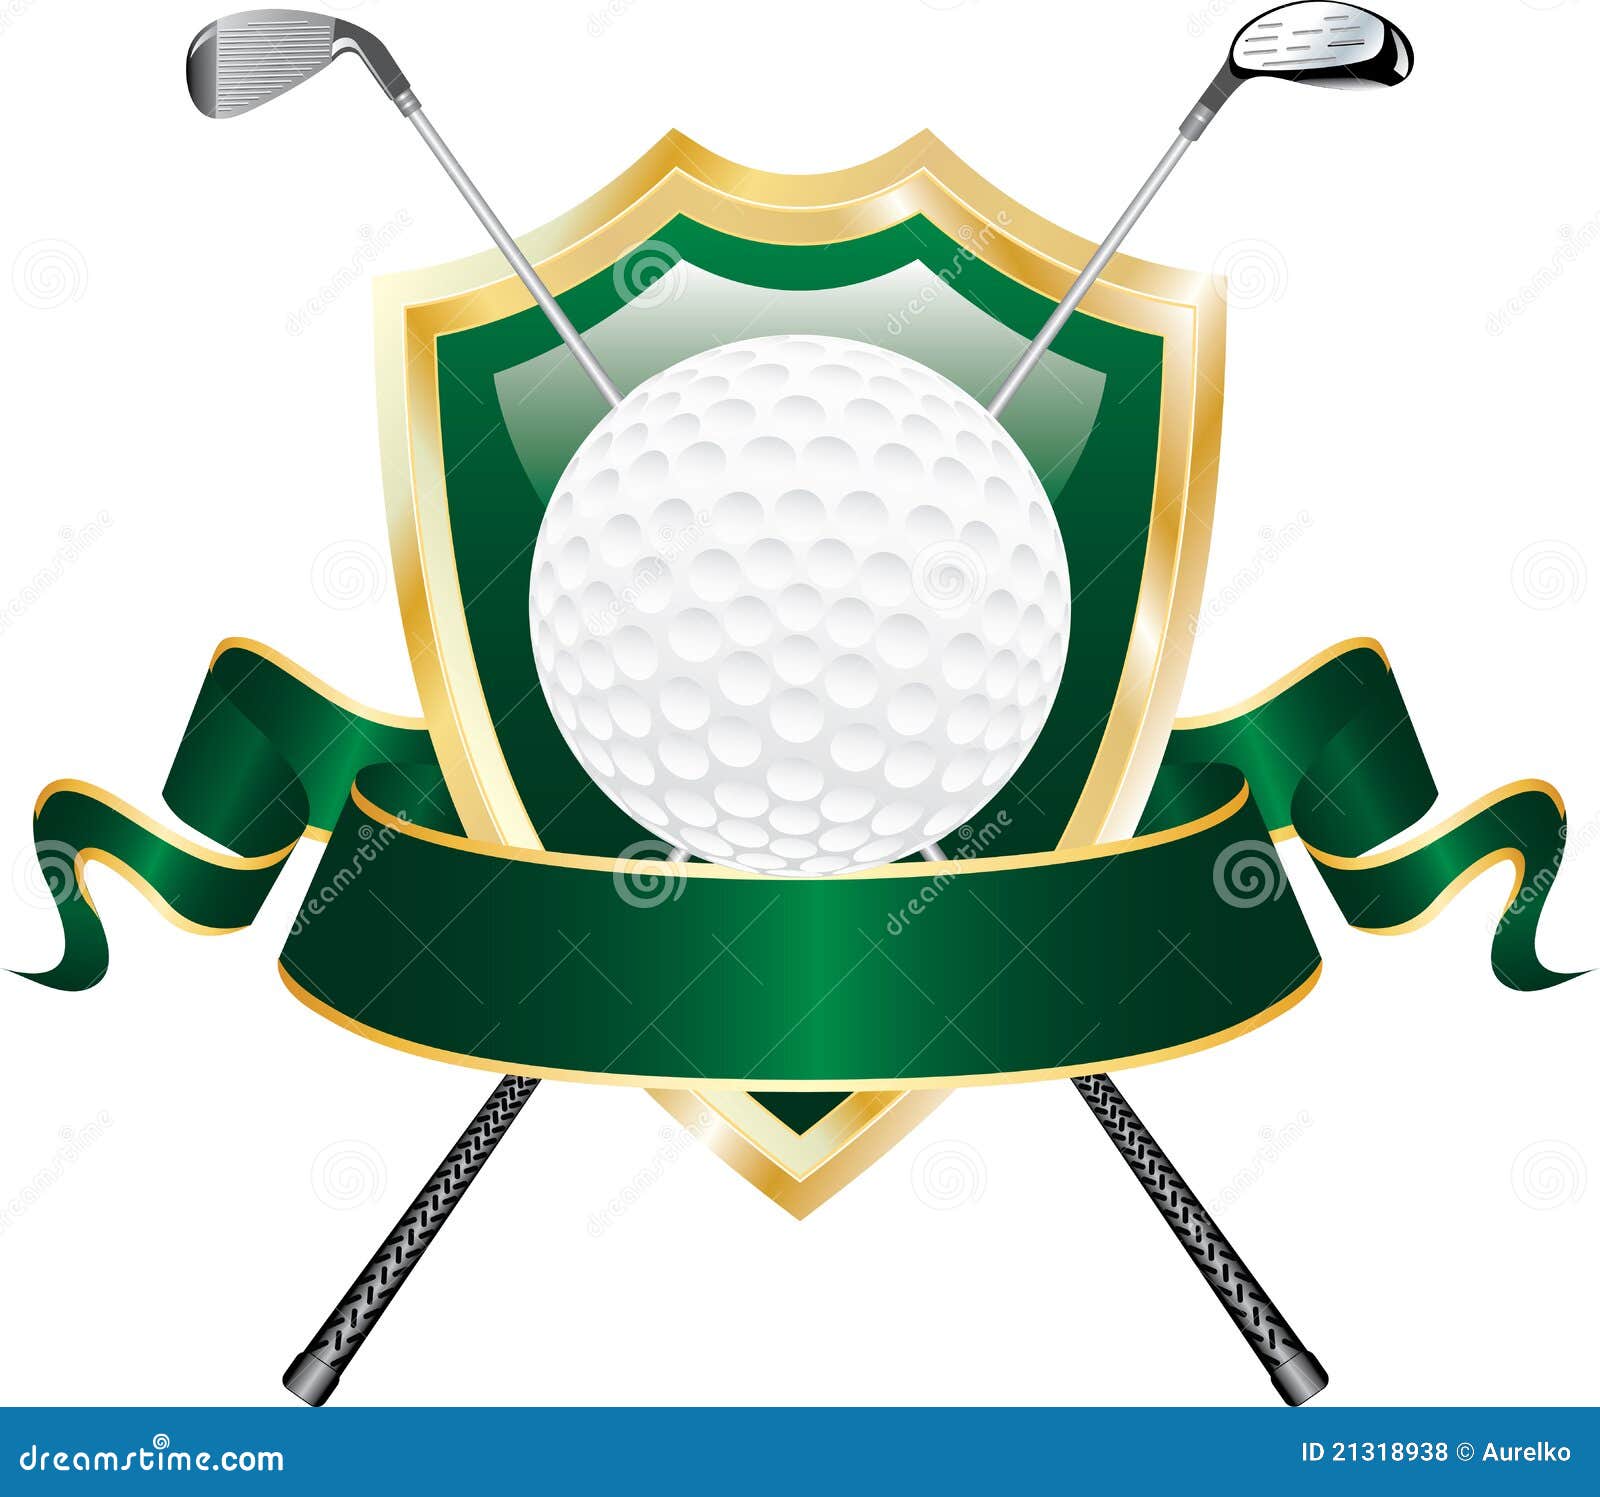 golf clipart free download - photo #44